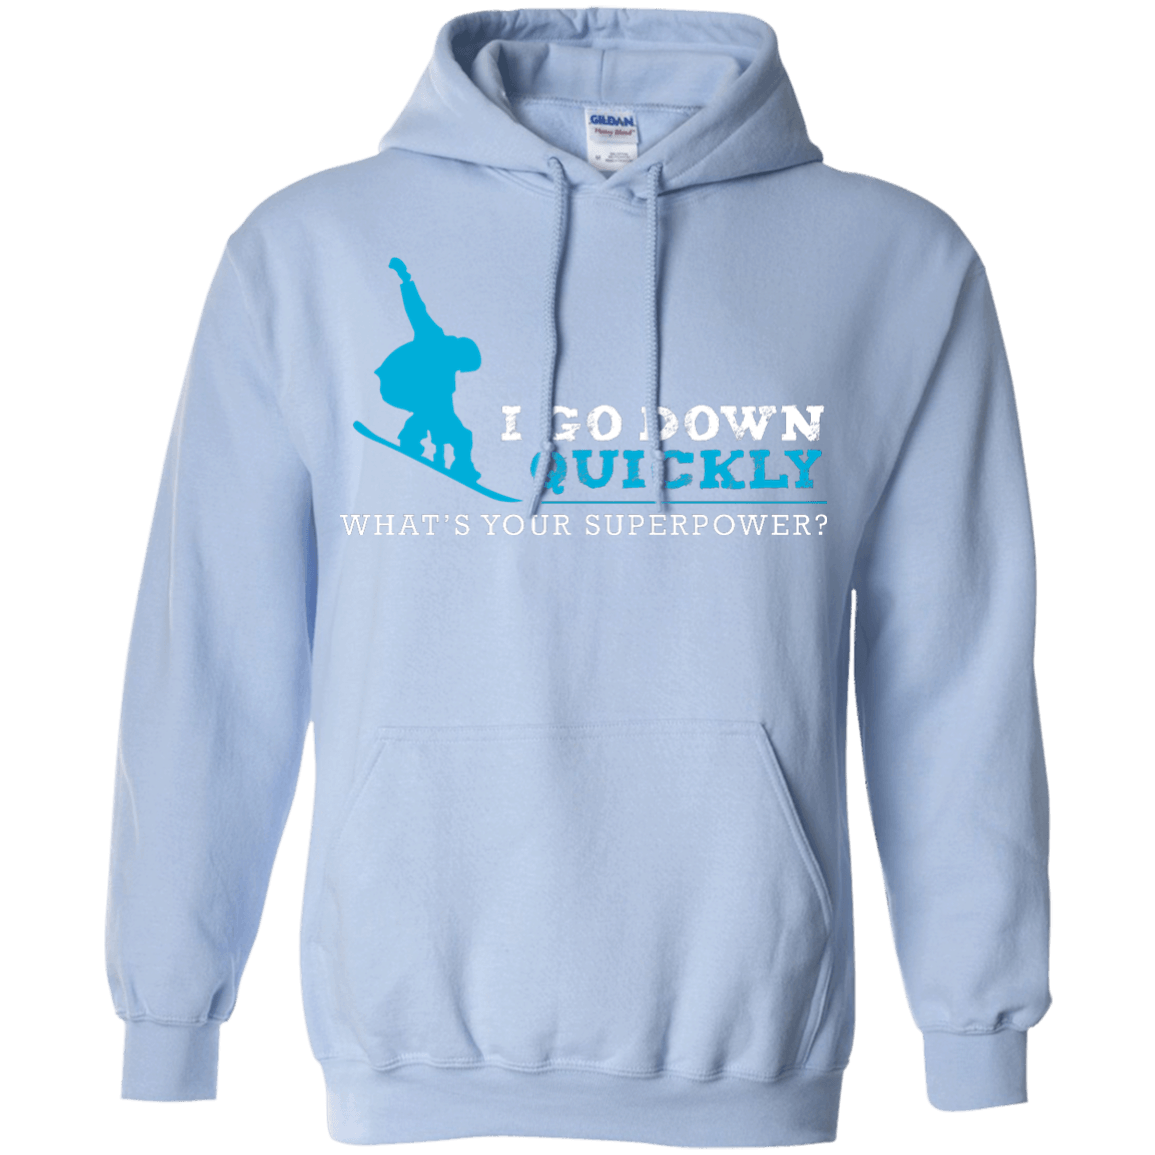 I Go Down Quickly What's Your Superpower - Snowboard Hoodies - Powderaddicts